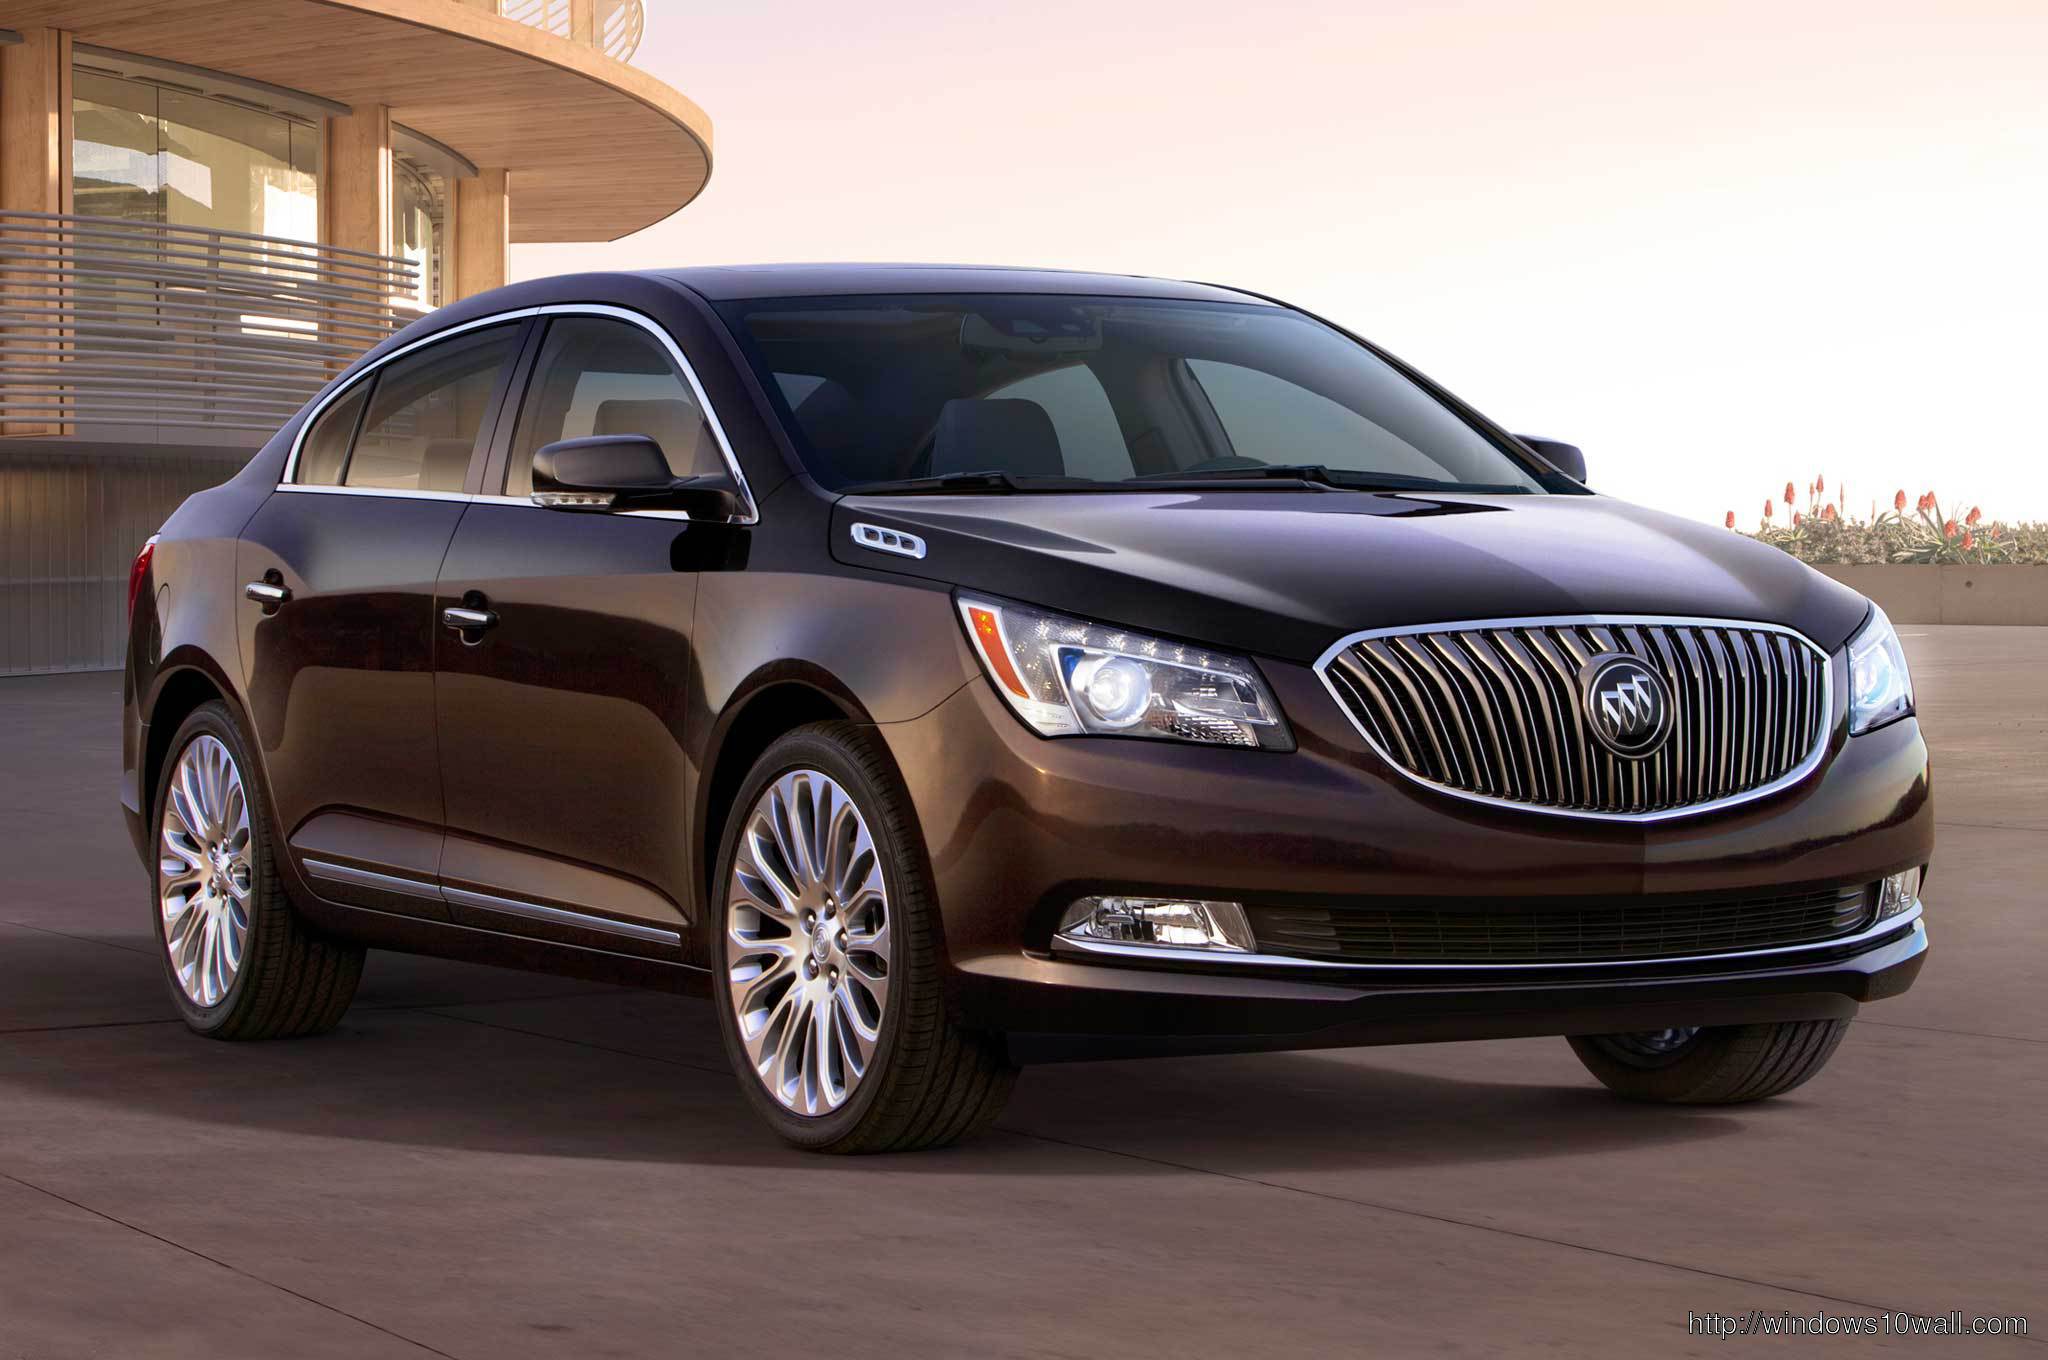 2014 Buick LaCrosse front side view Wallpaper